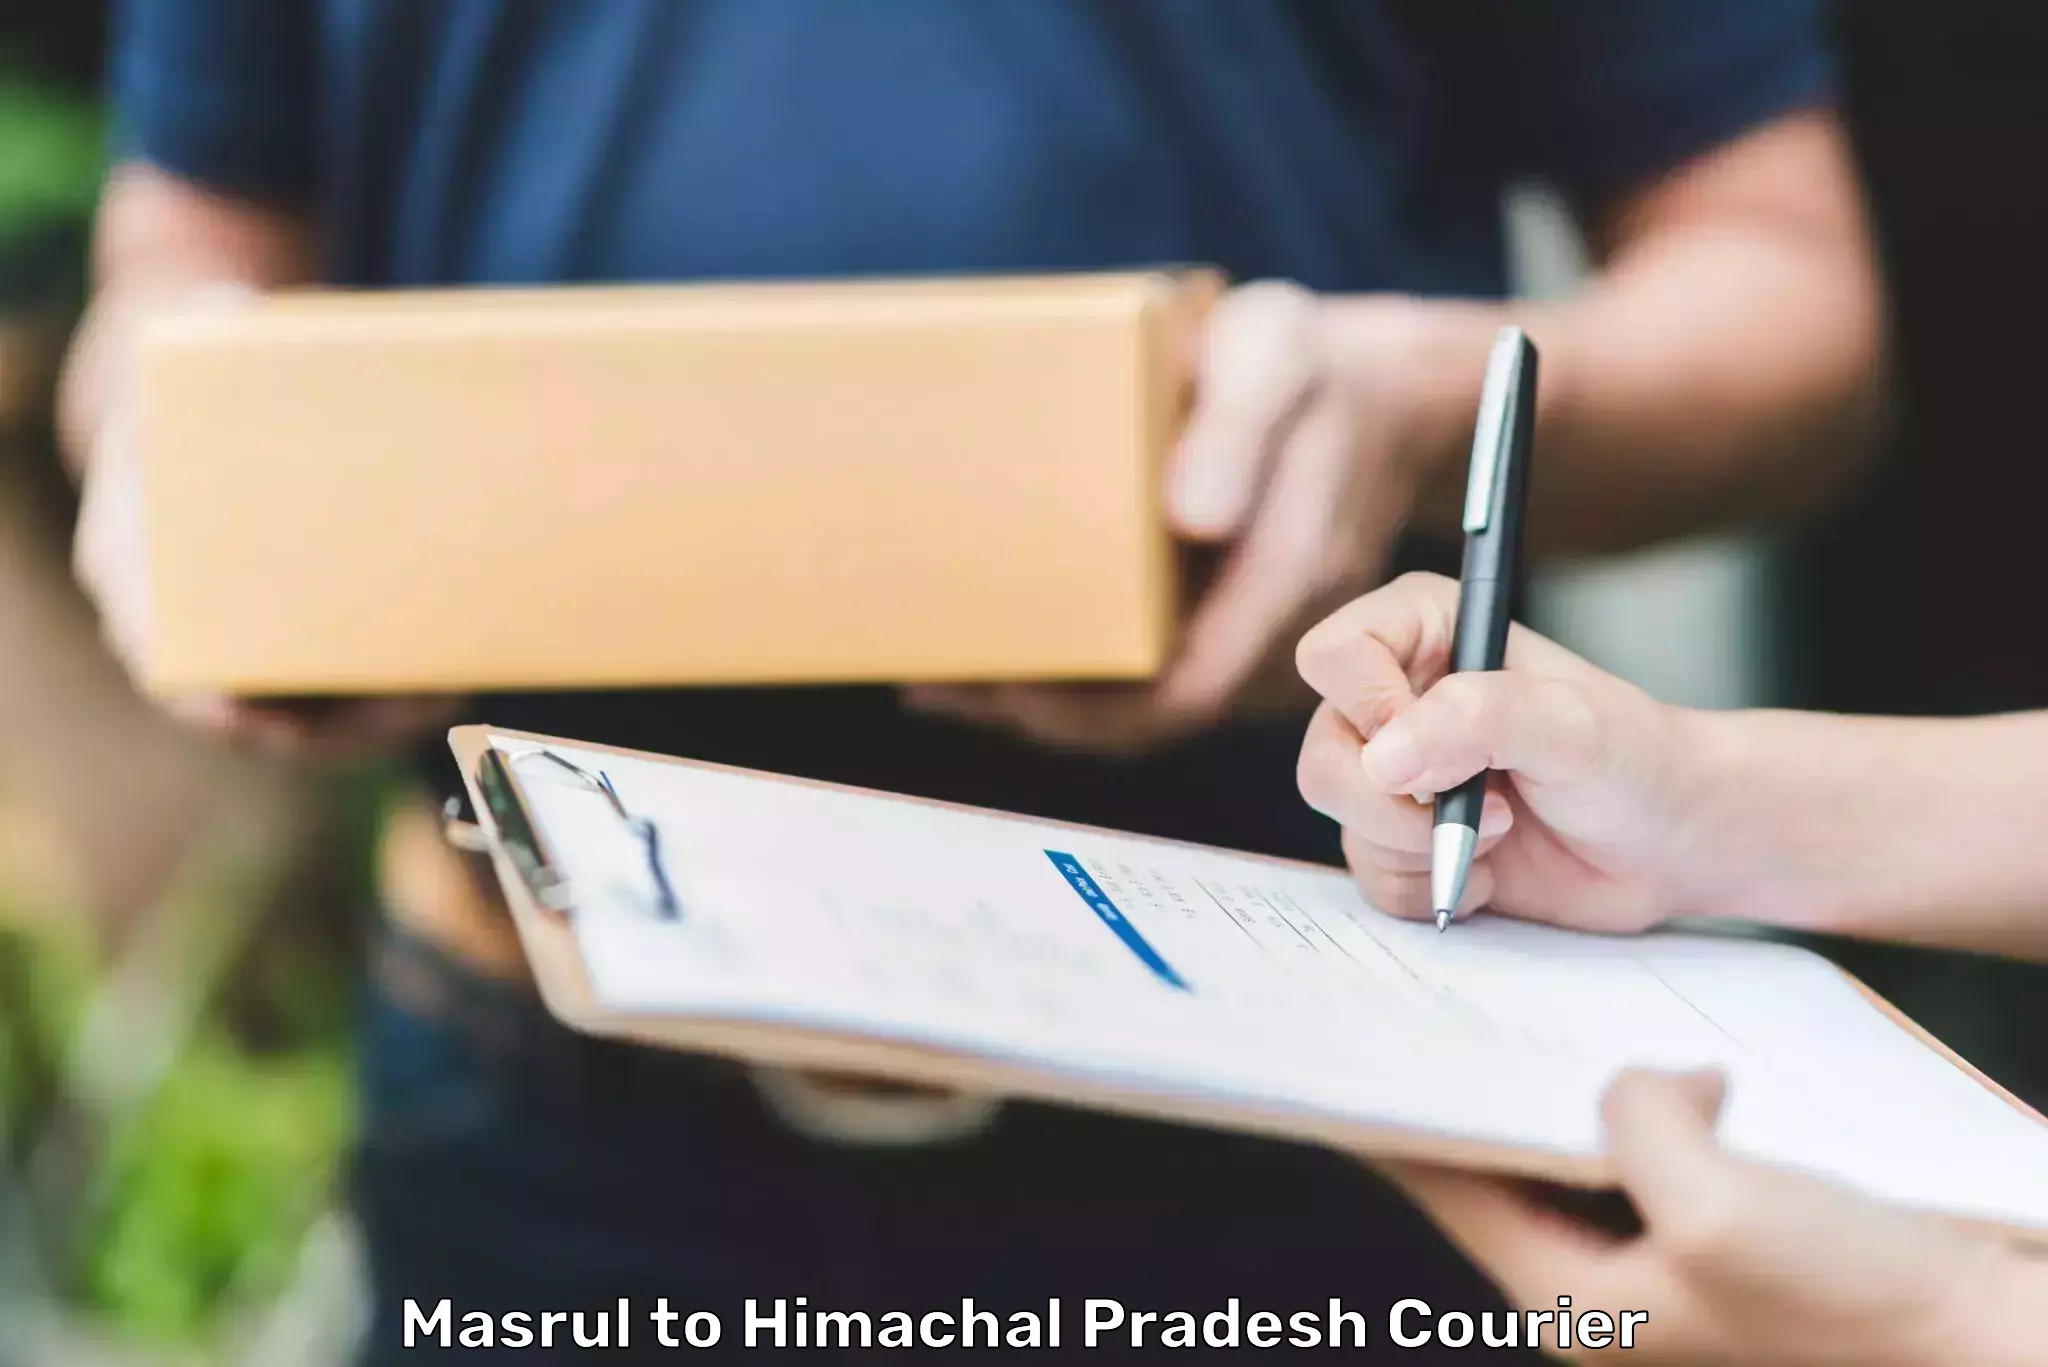 State-of-the-art courier technology Masrul to Himachal Pradesh